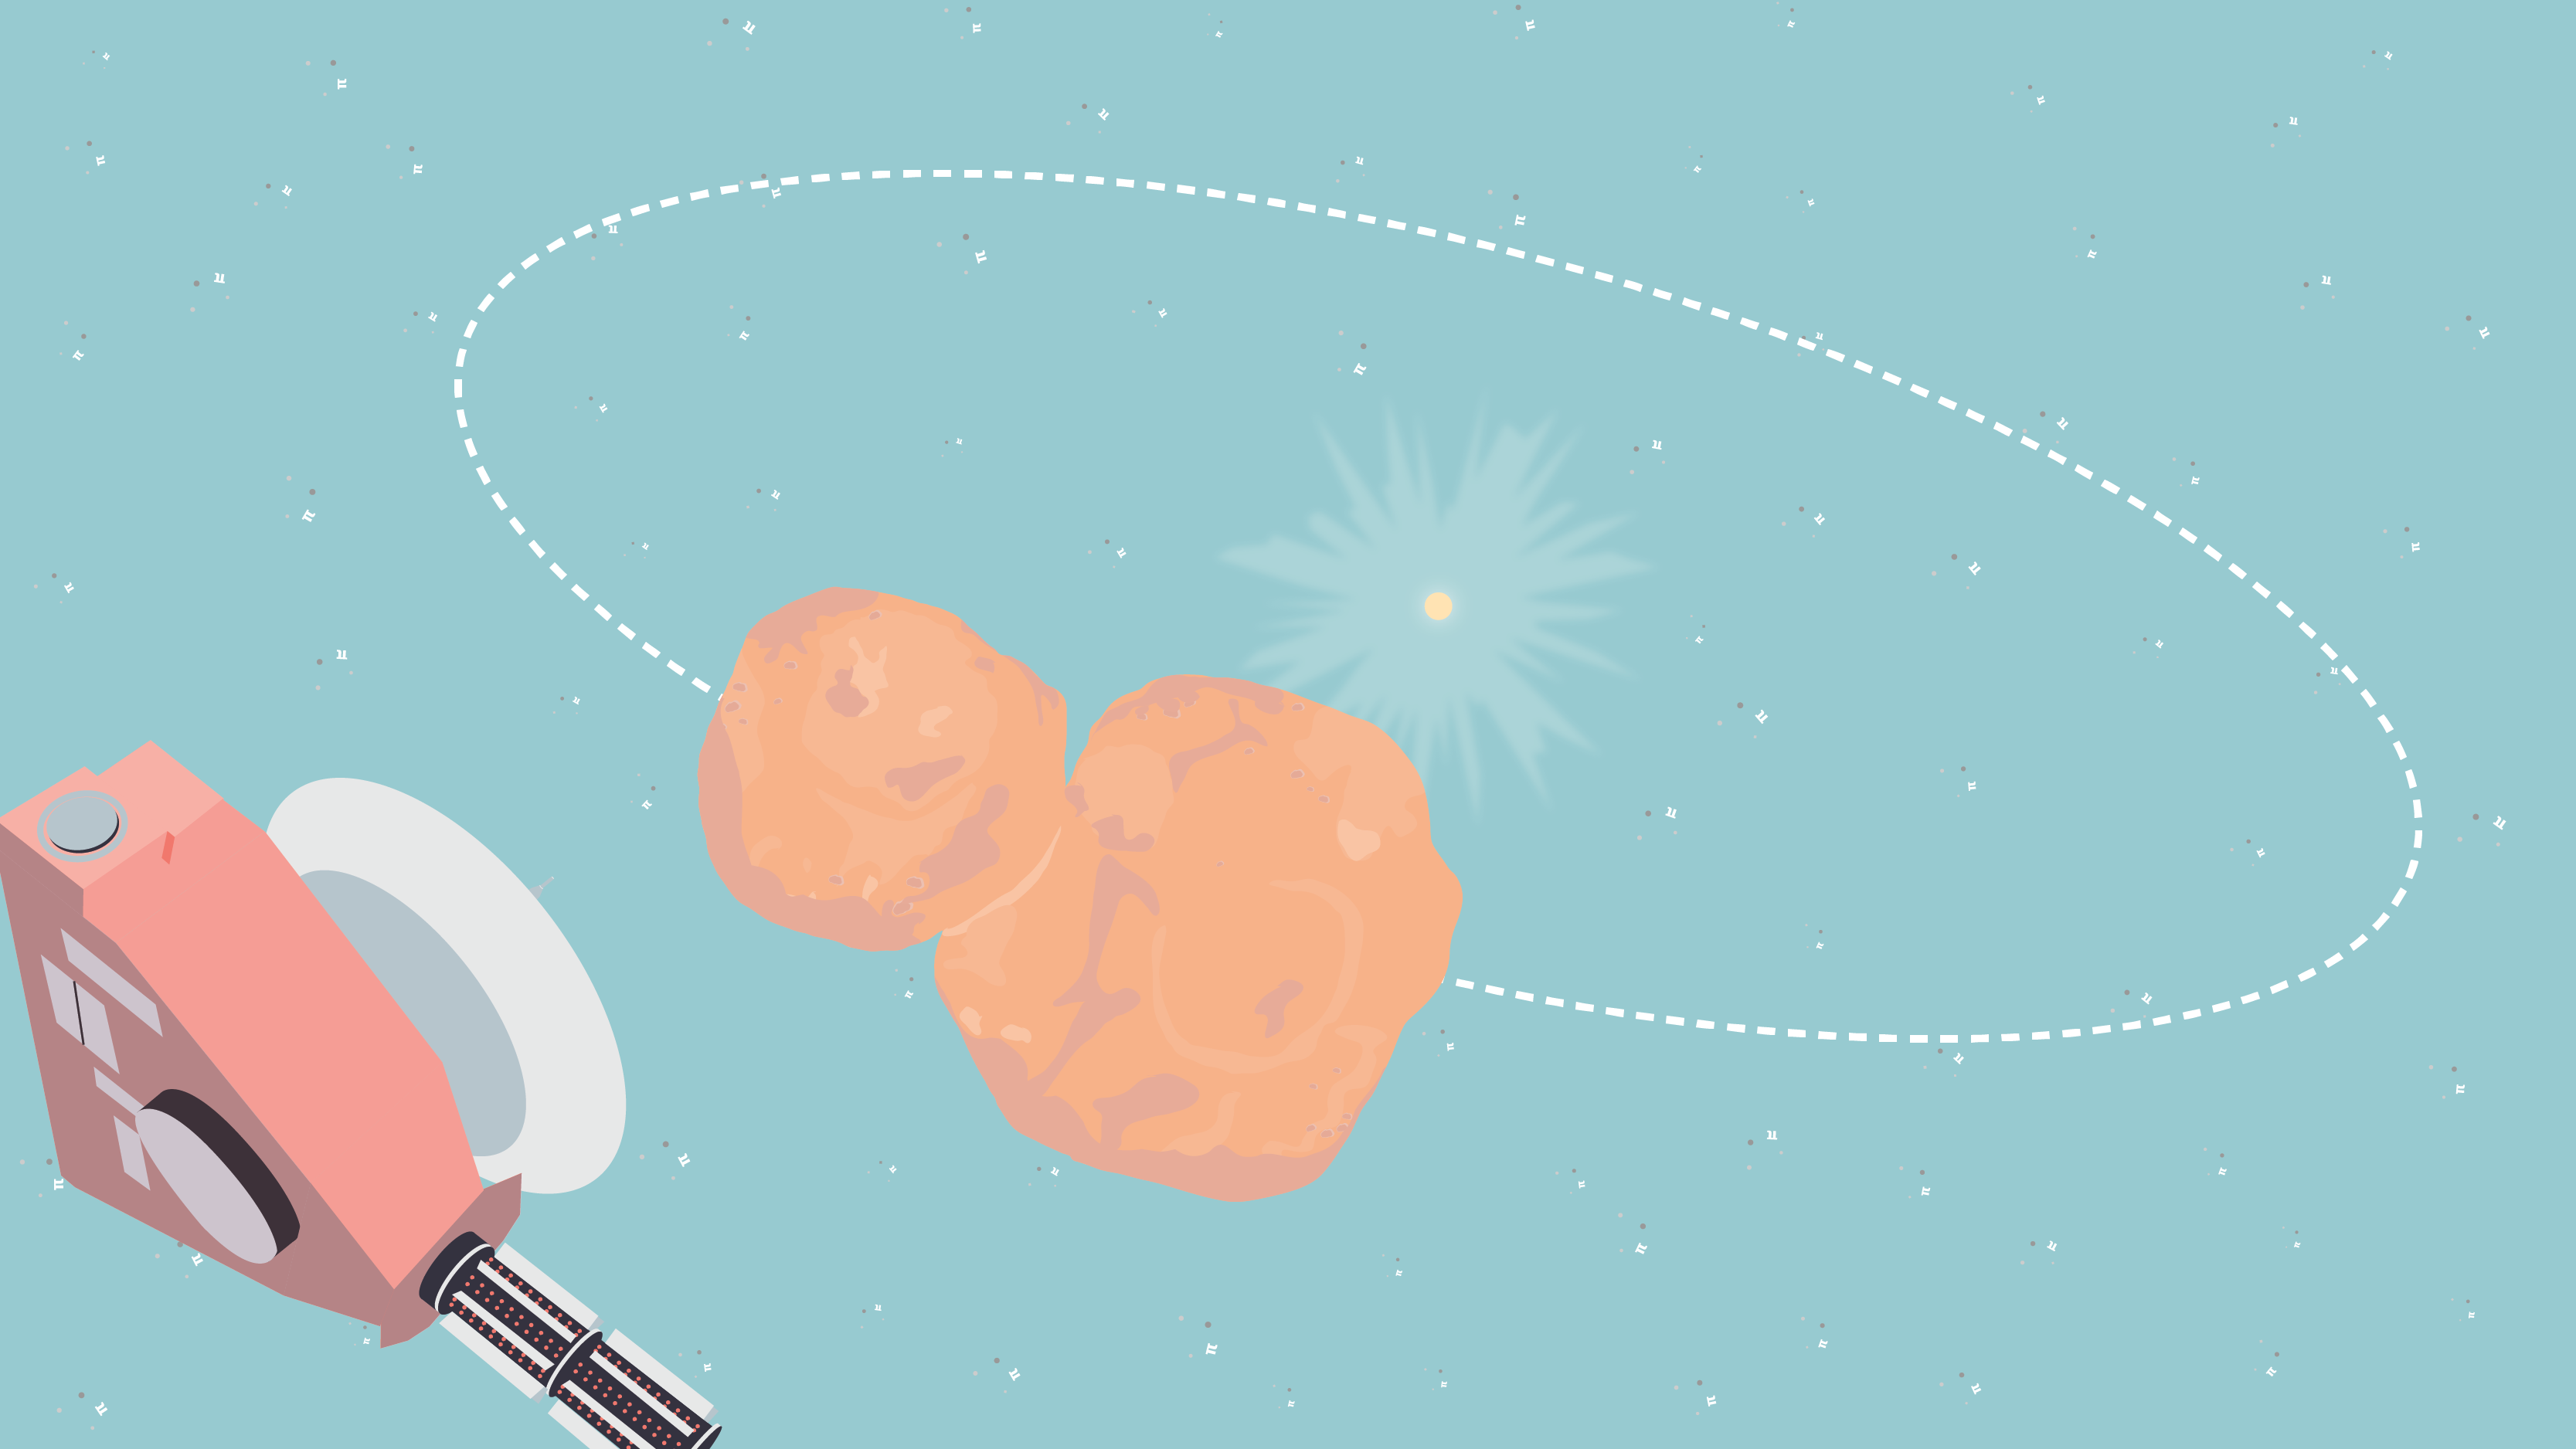 Illustration of Arrokoth orbiting the Sun with New Horizons flying by.